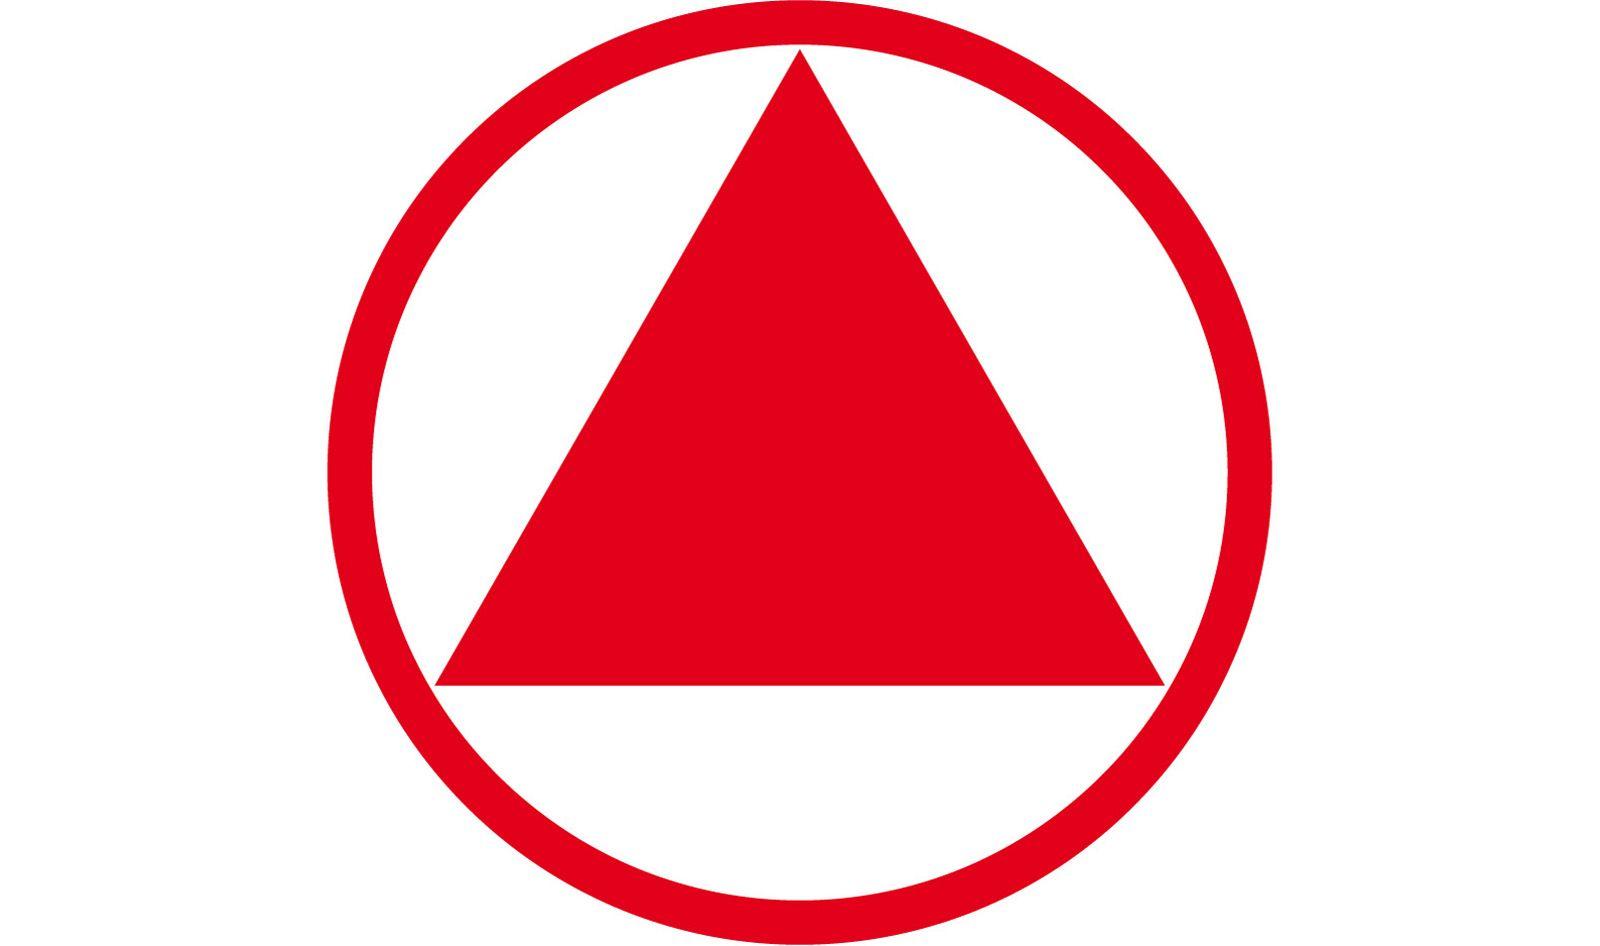 Red Circle with White Triangle Logo - Our Corporate Symbols|Company Information|Takeda Pharmaceutical ...